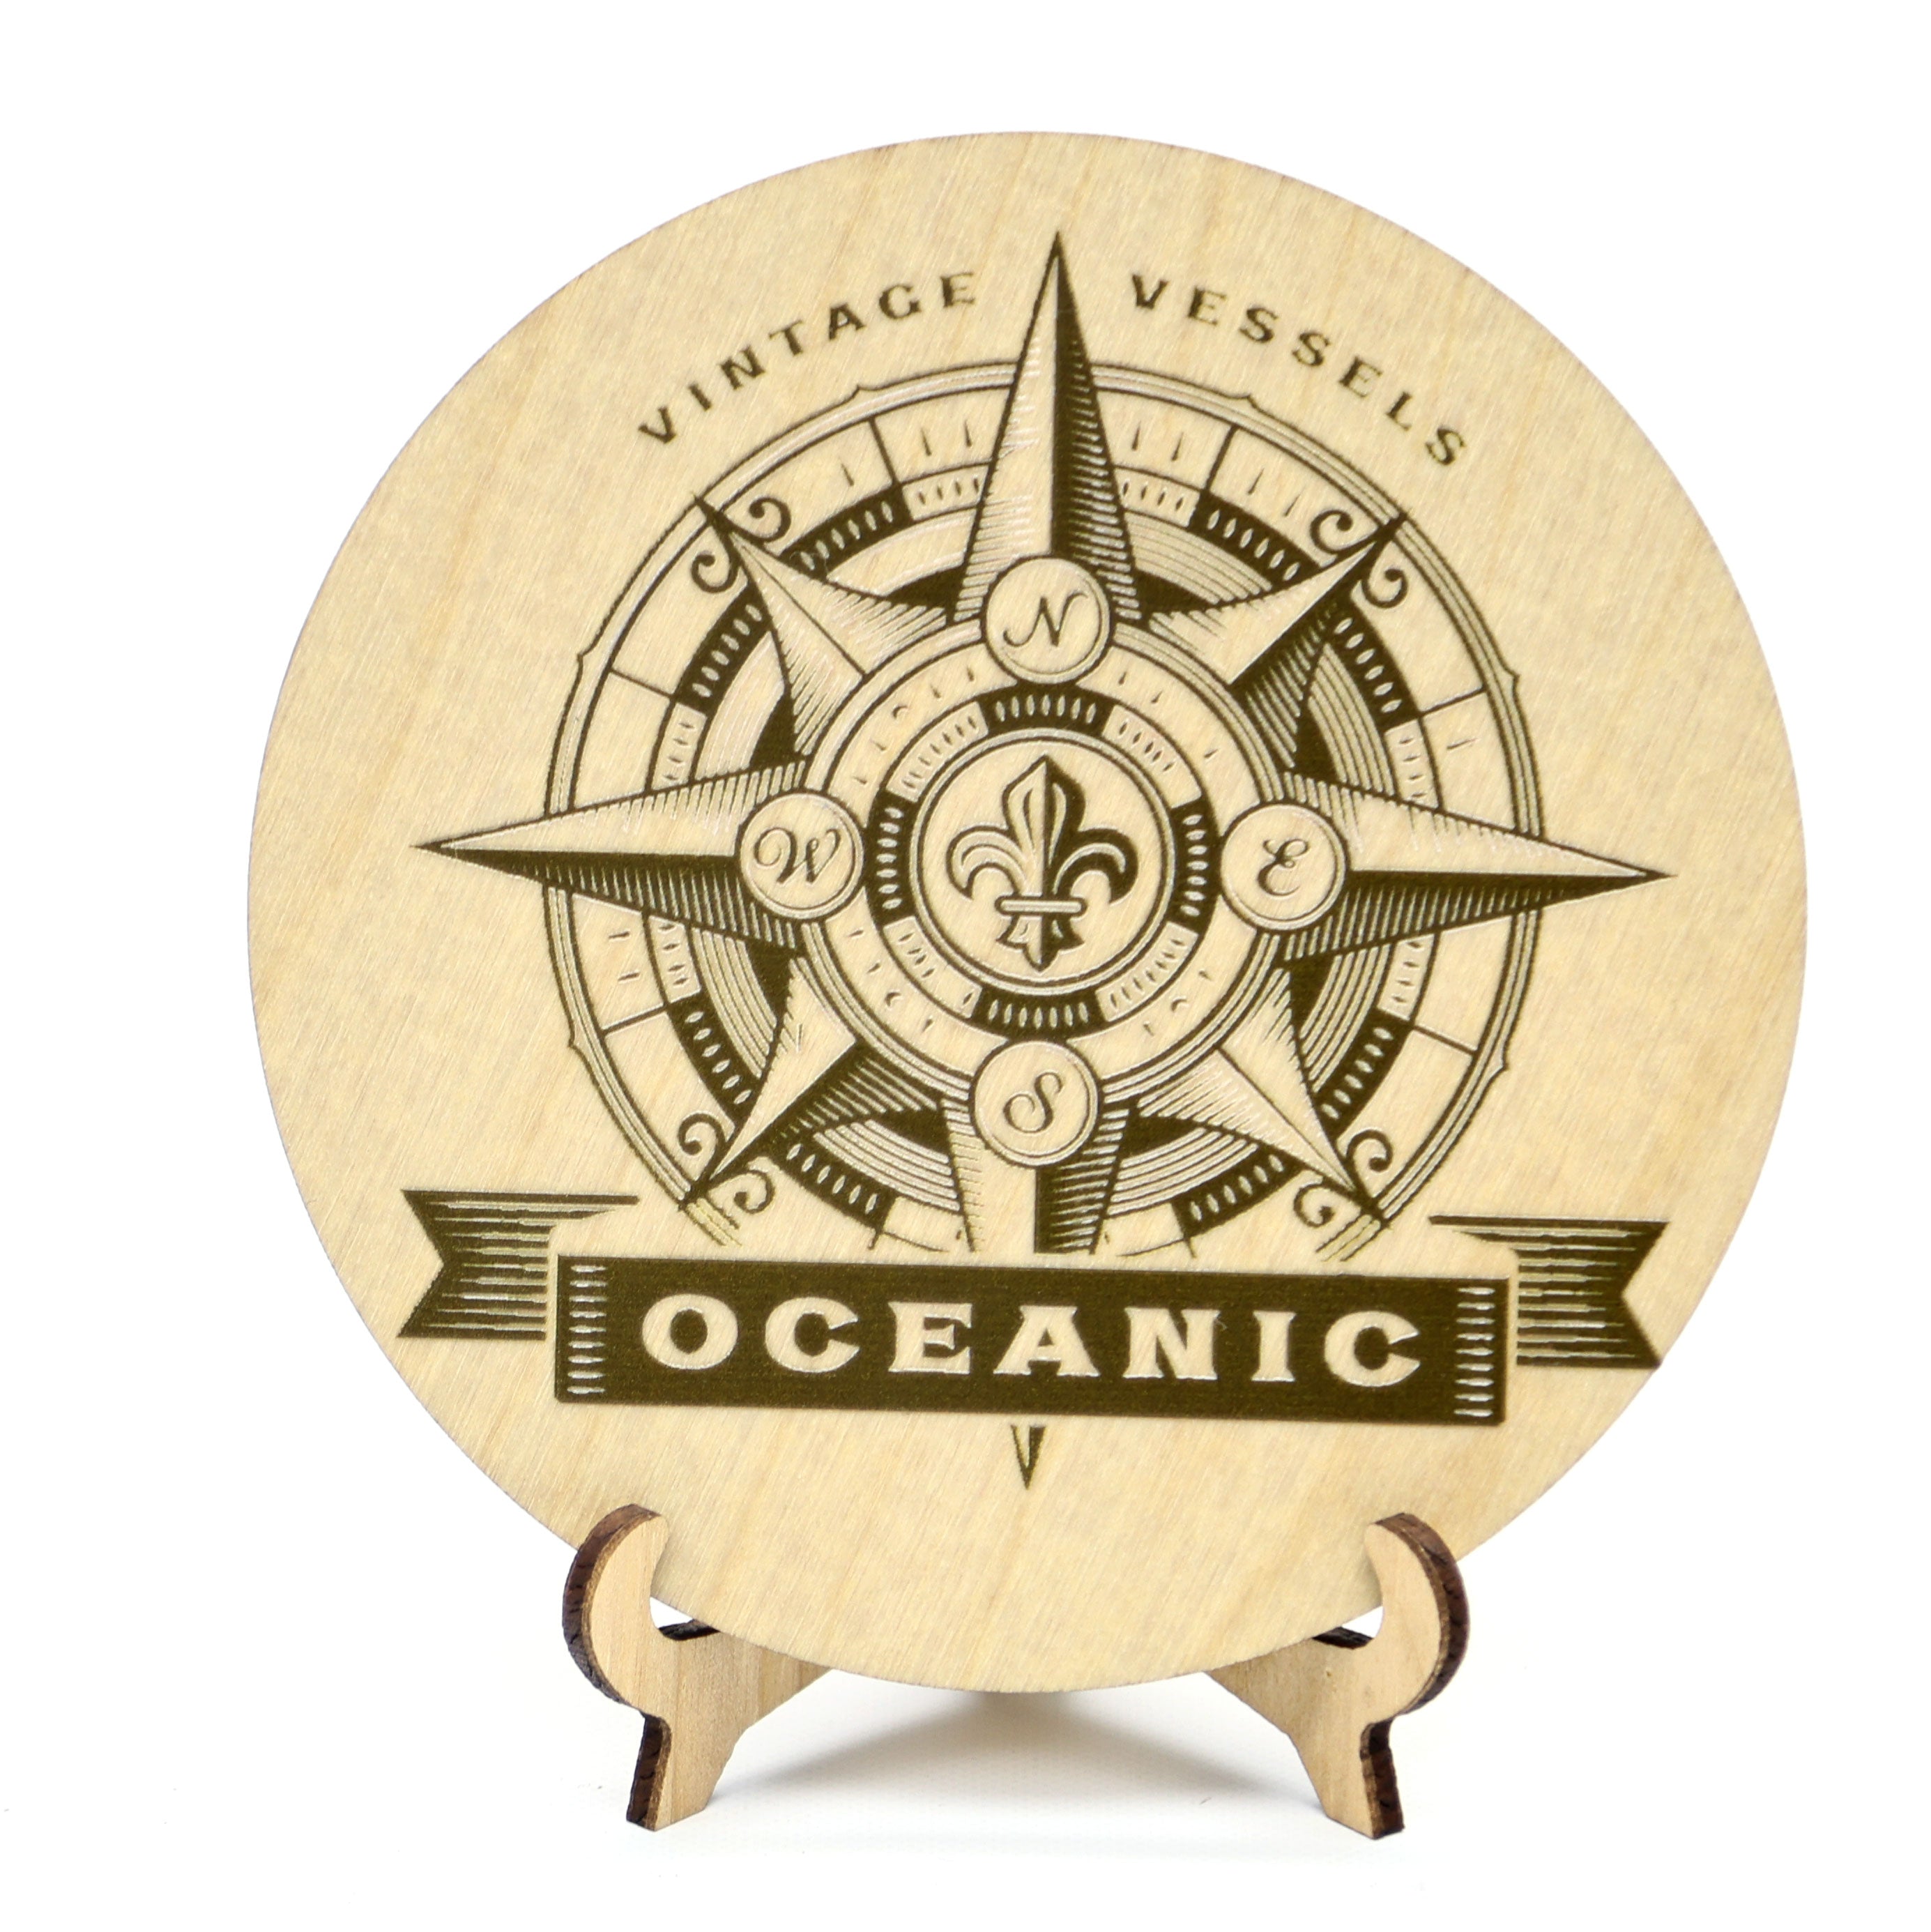 Wooden Coasters Set of 4 Pieces with a Nautical Designs - Black